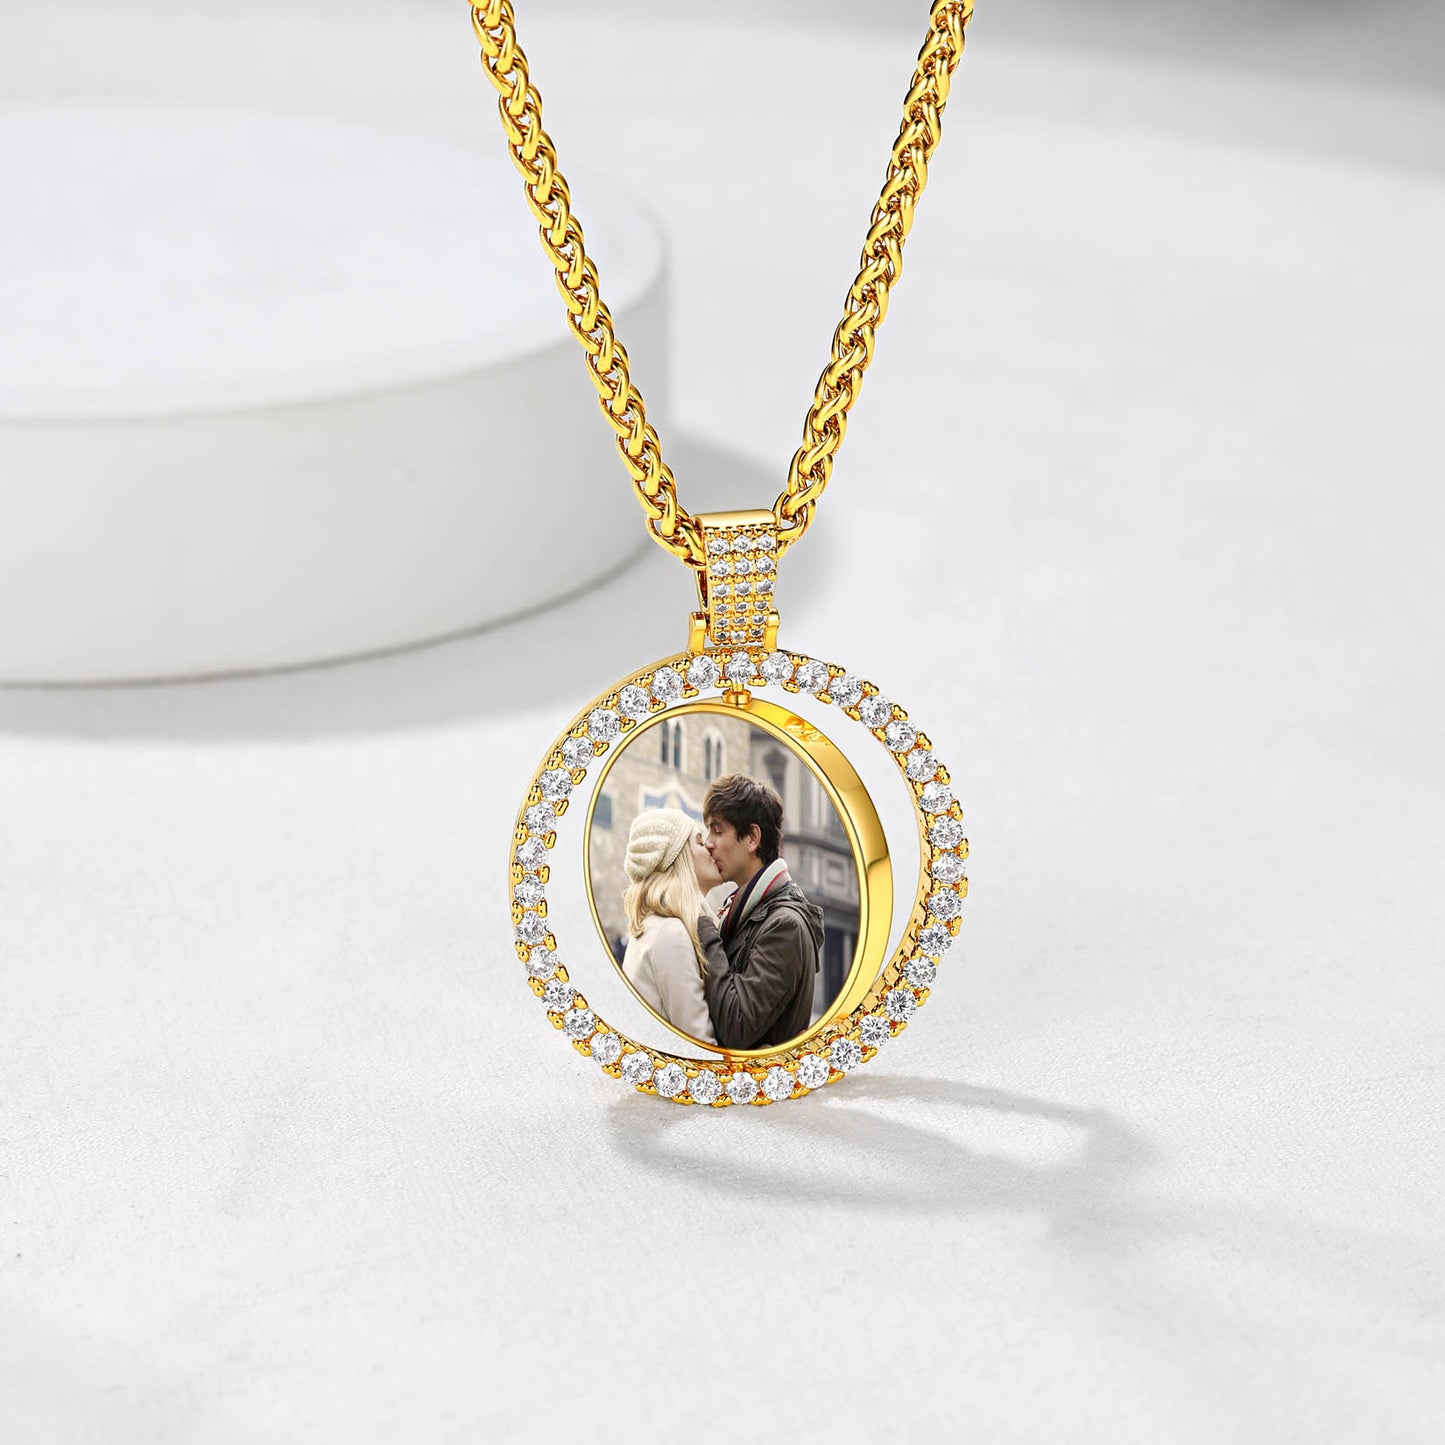 Customized Double Sided Picture Necklace With Cubic Zirconia